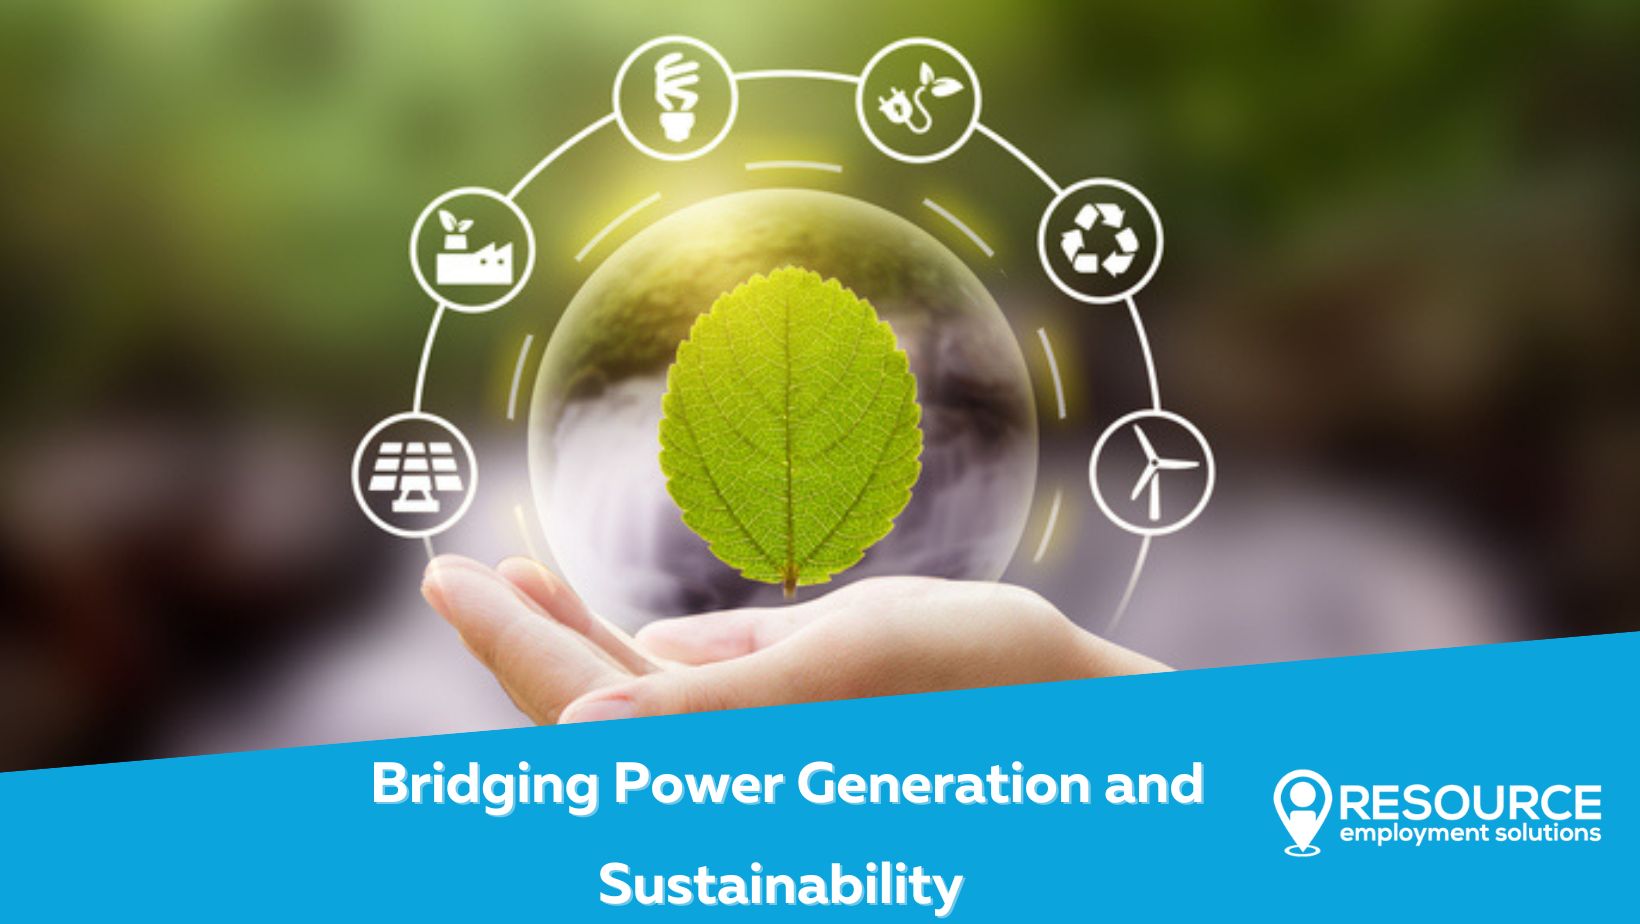 Bridging Power Generation and Sustainability with Resource Employment Solutions